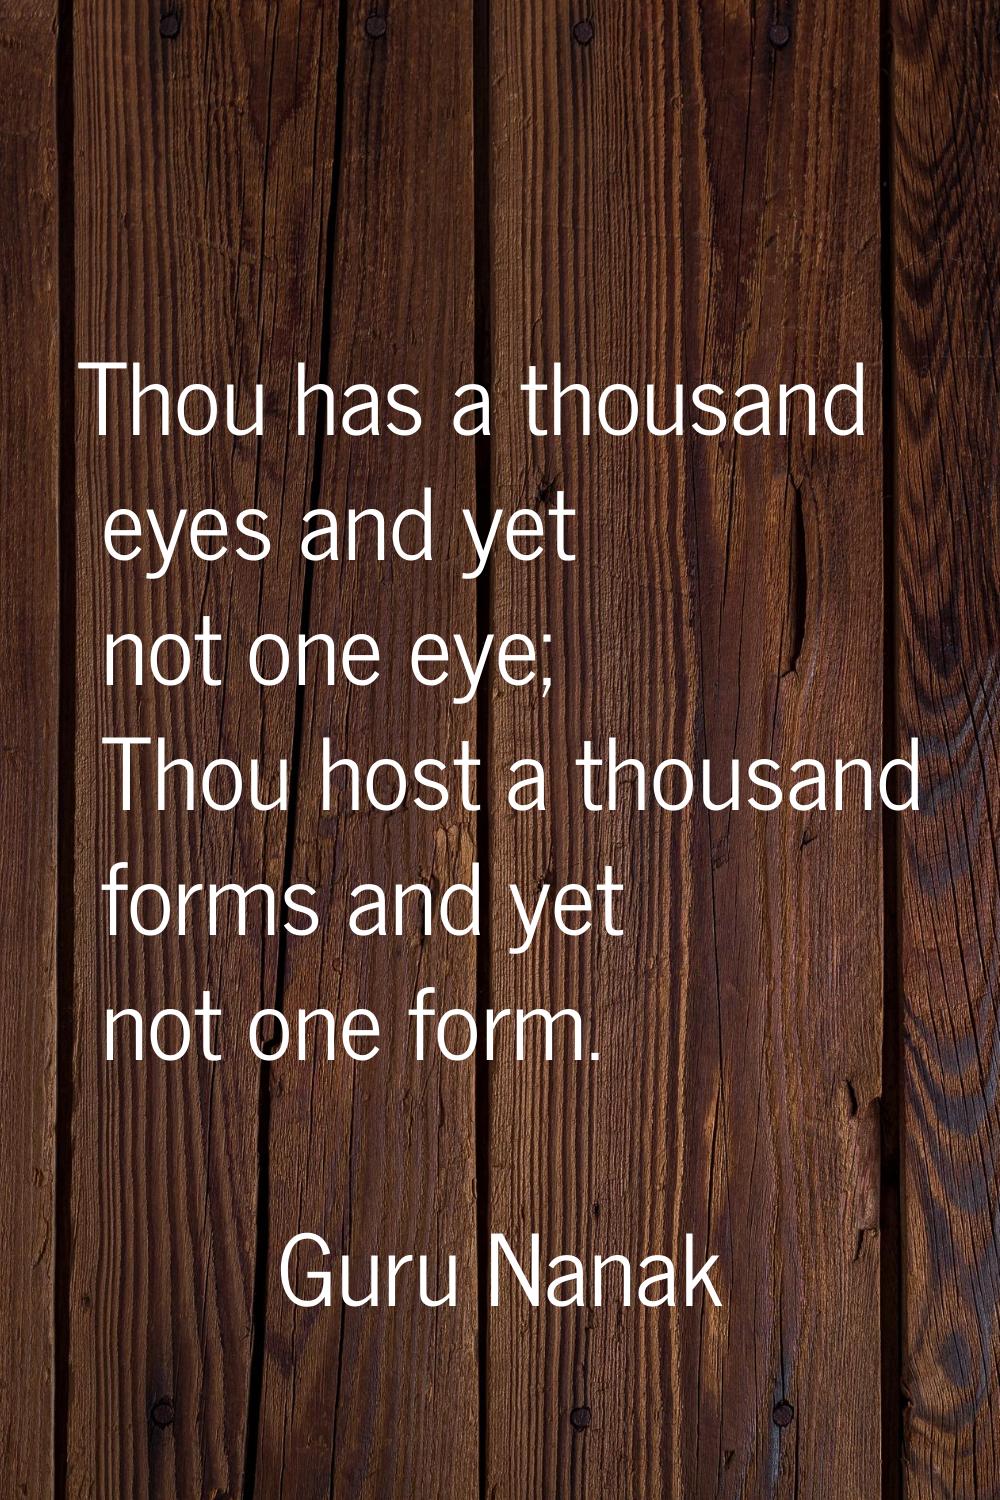 Thou has a thousand eyes and yet not one eye; Thou host a thousand forms and yet not one form.